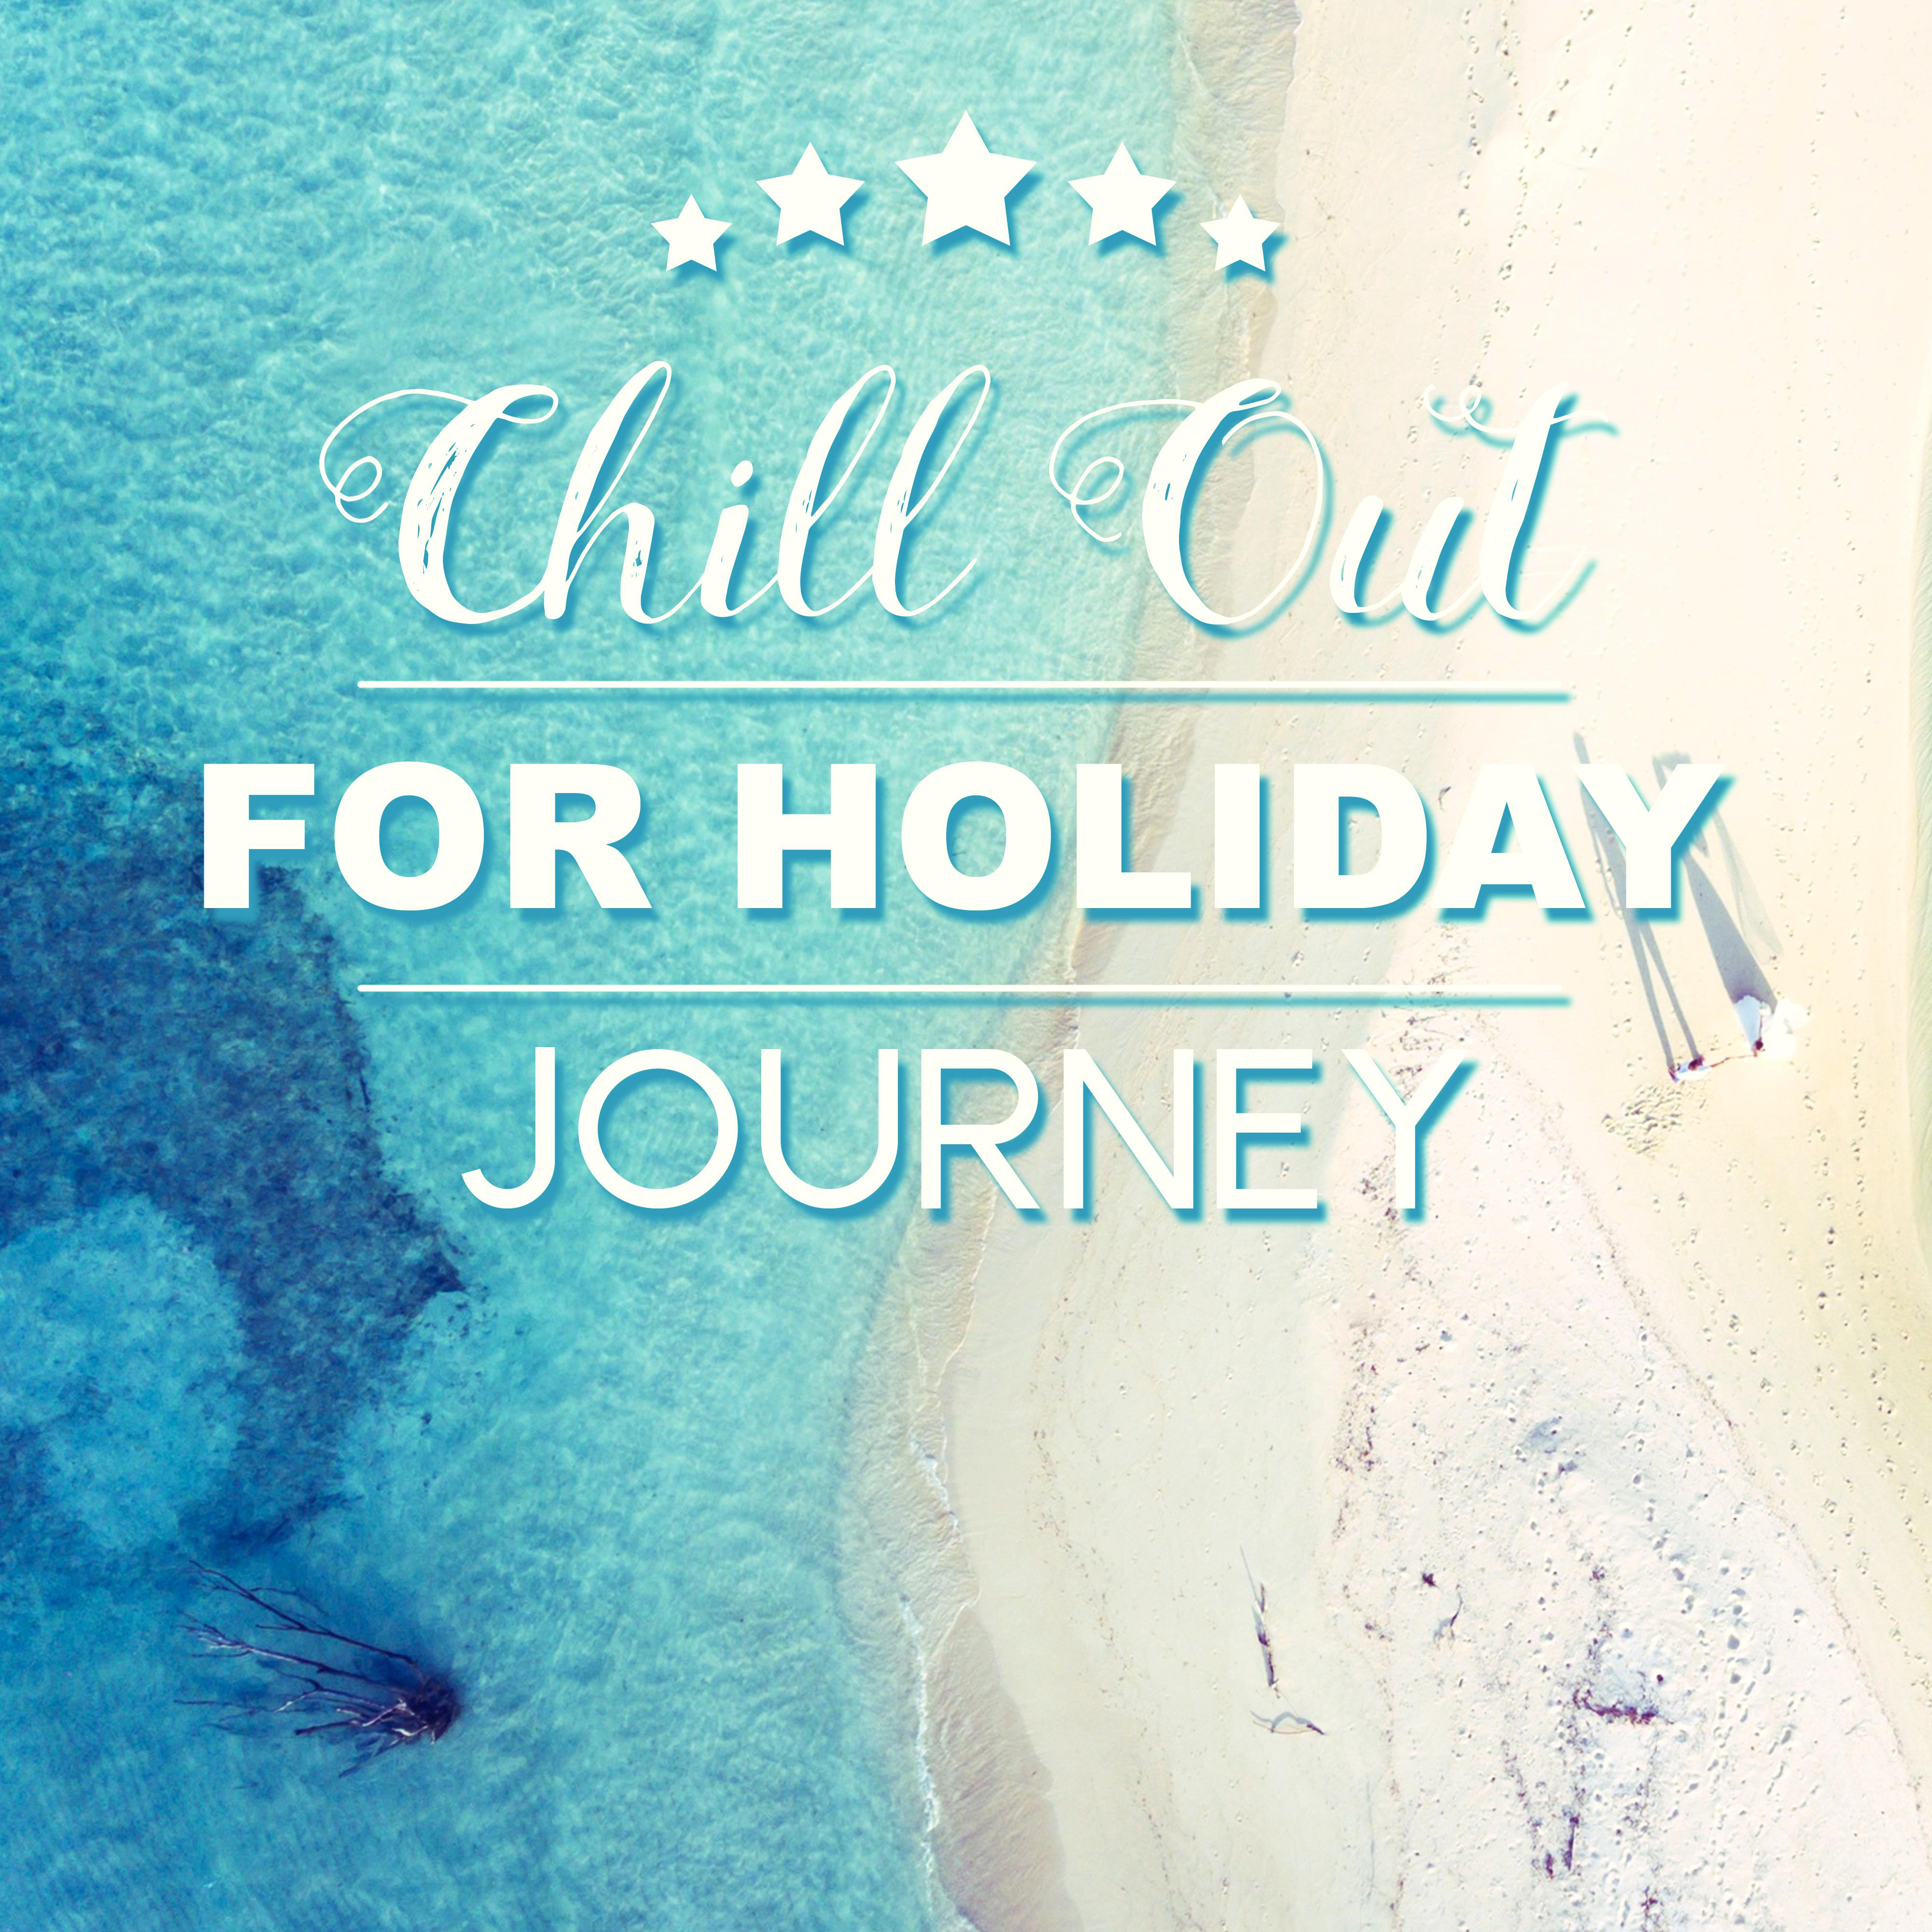 Chill Out for Holiday Journey – Relaxing Beach Music, Tropical Chill, Peaceful Sounds